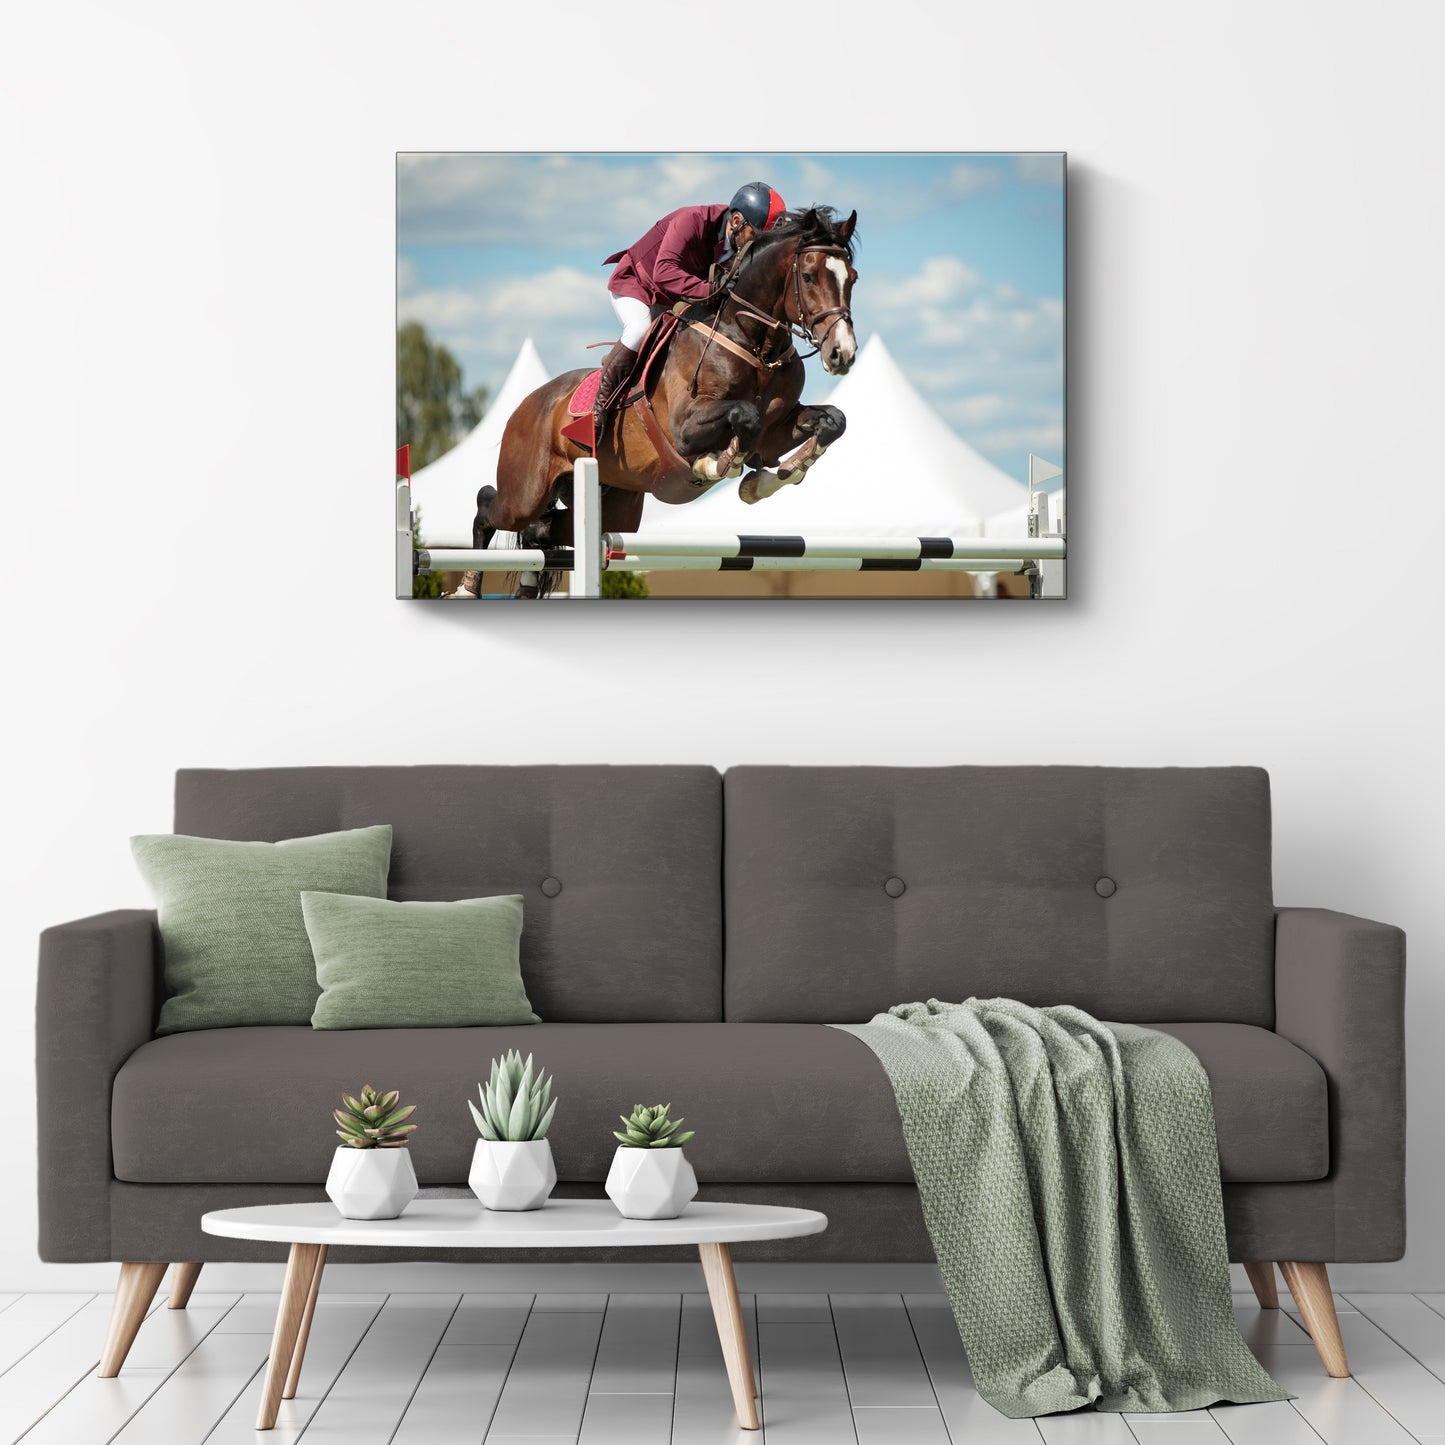 Equestrian Horse Jumping Canvas Wall Art - Image by Tailored Canvases